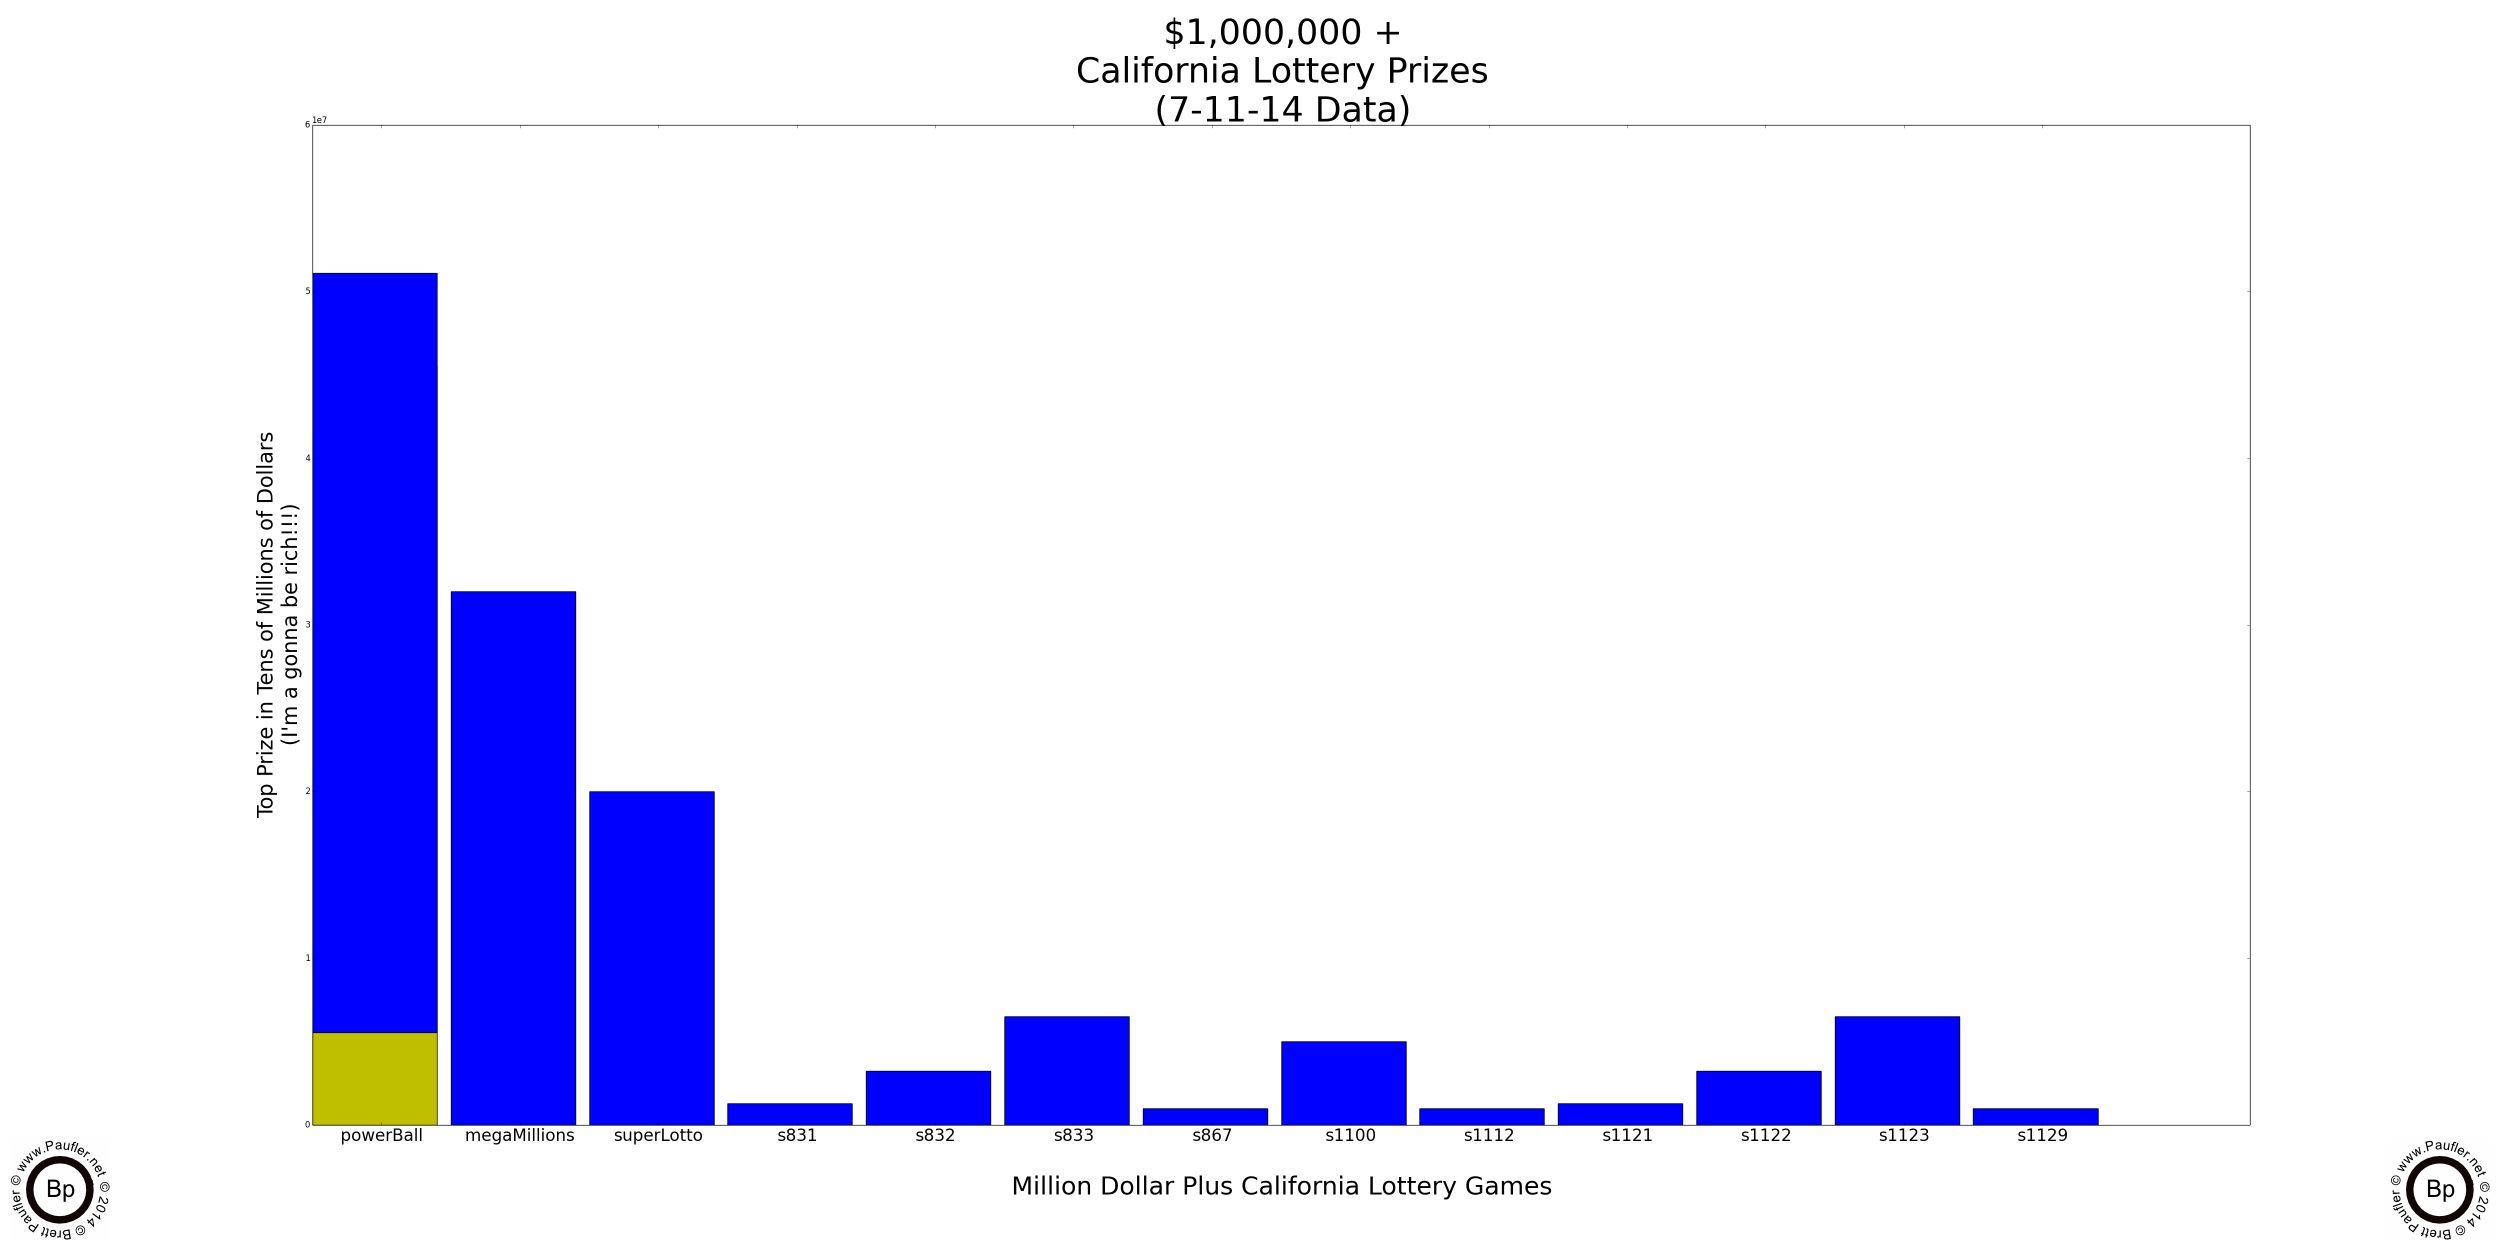 Chance of Winning a $1,000,000+ California Lottery Jackpot if lower level prizes reinvested